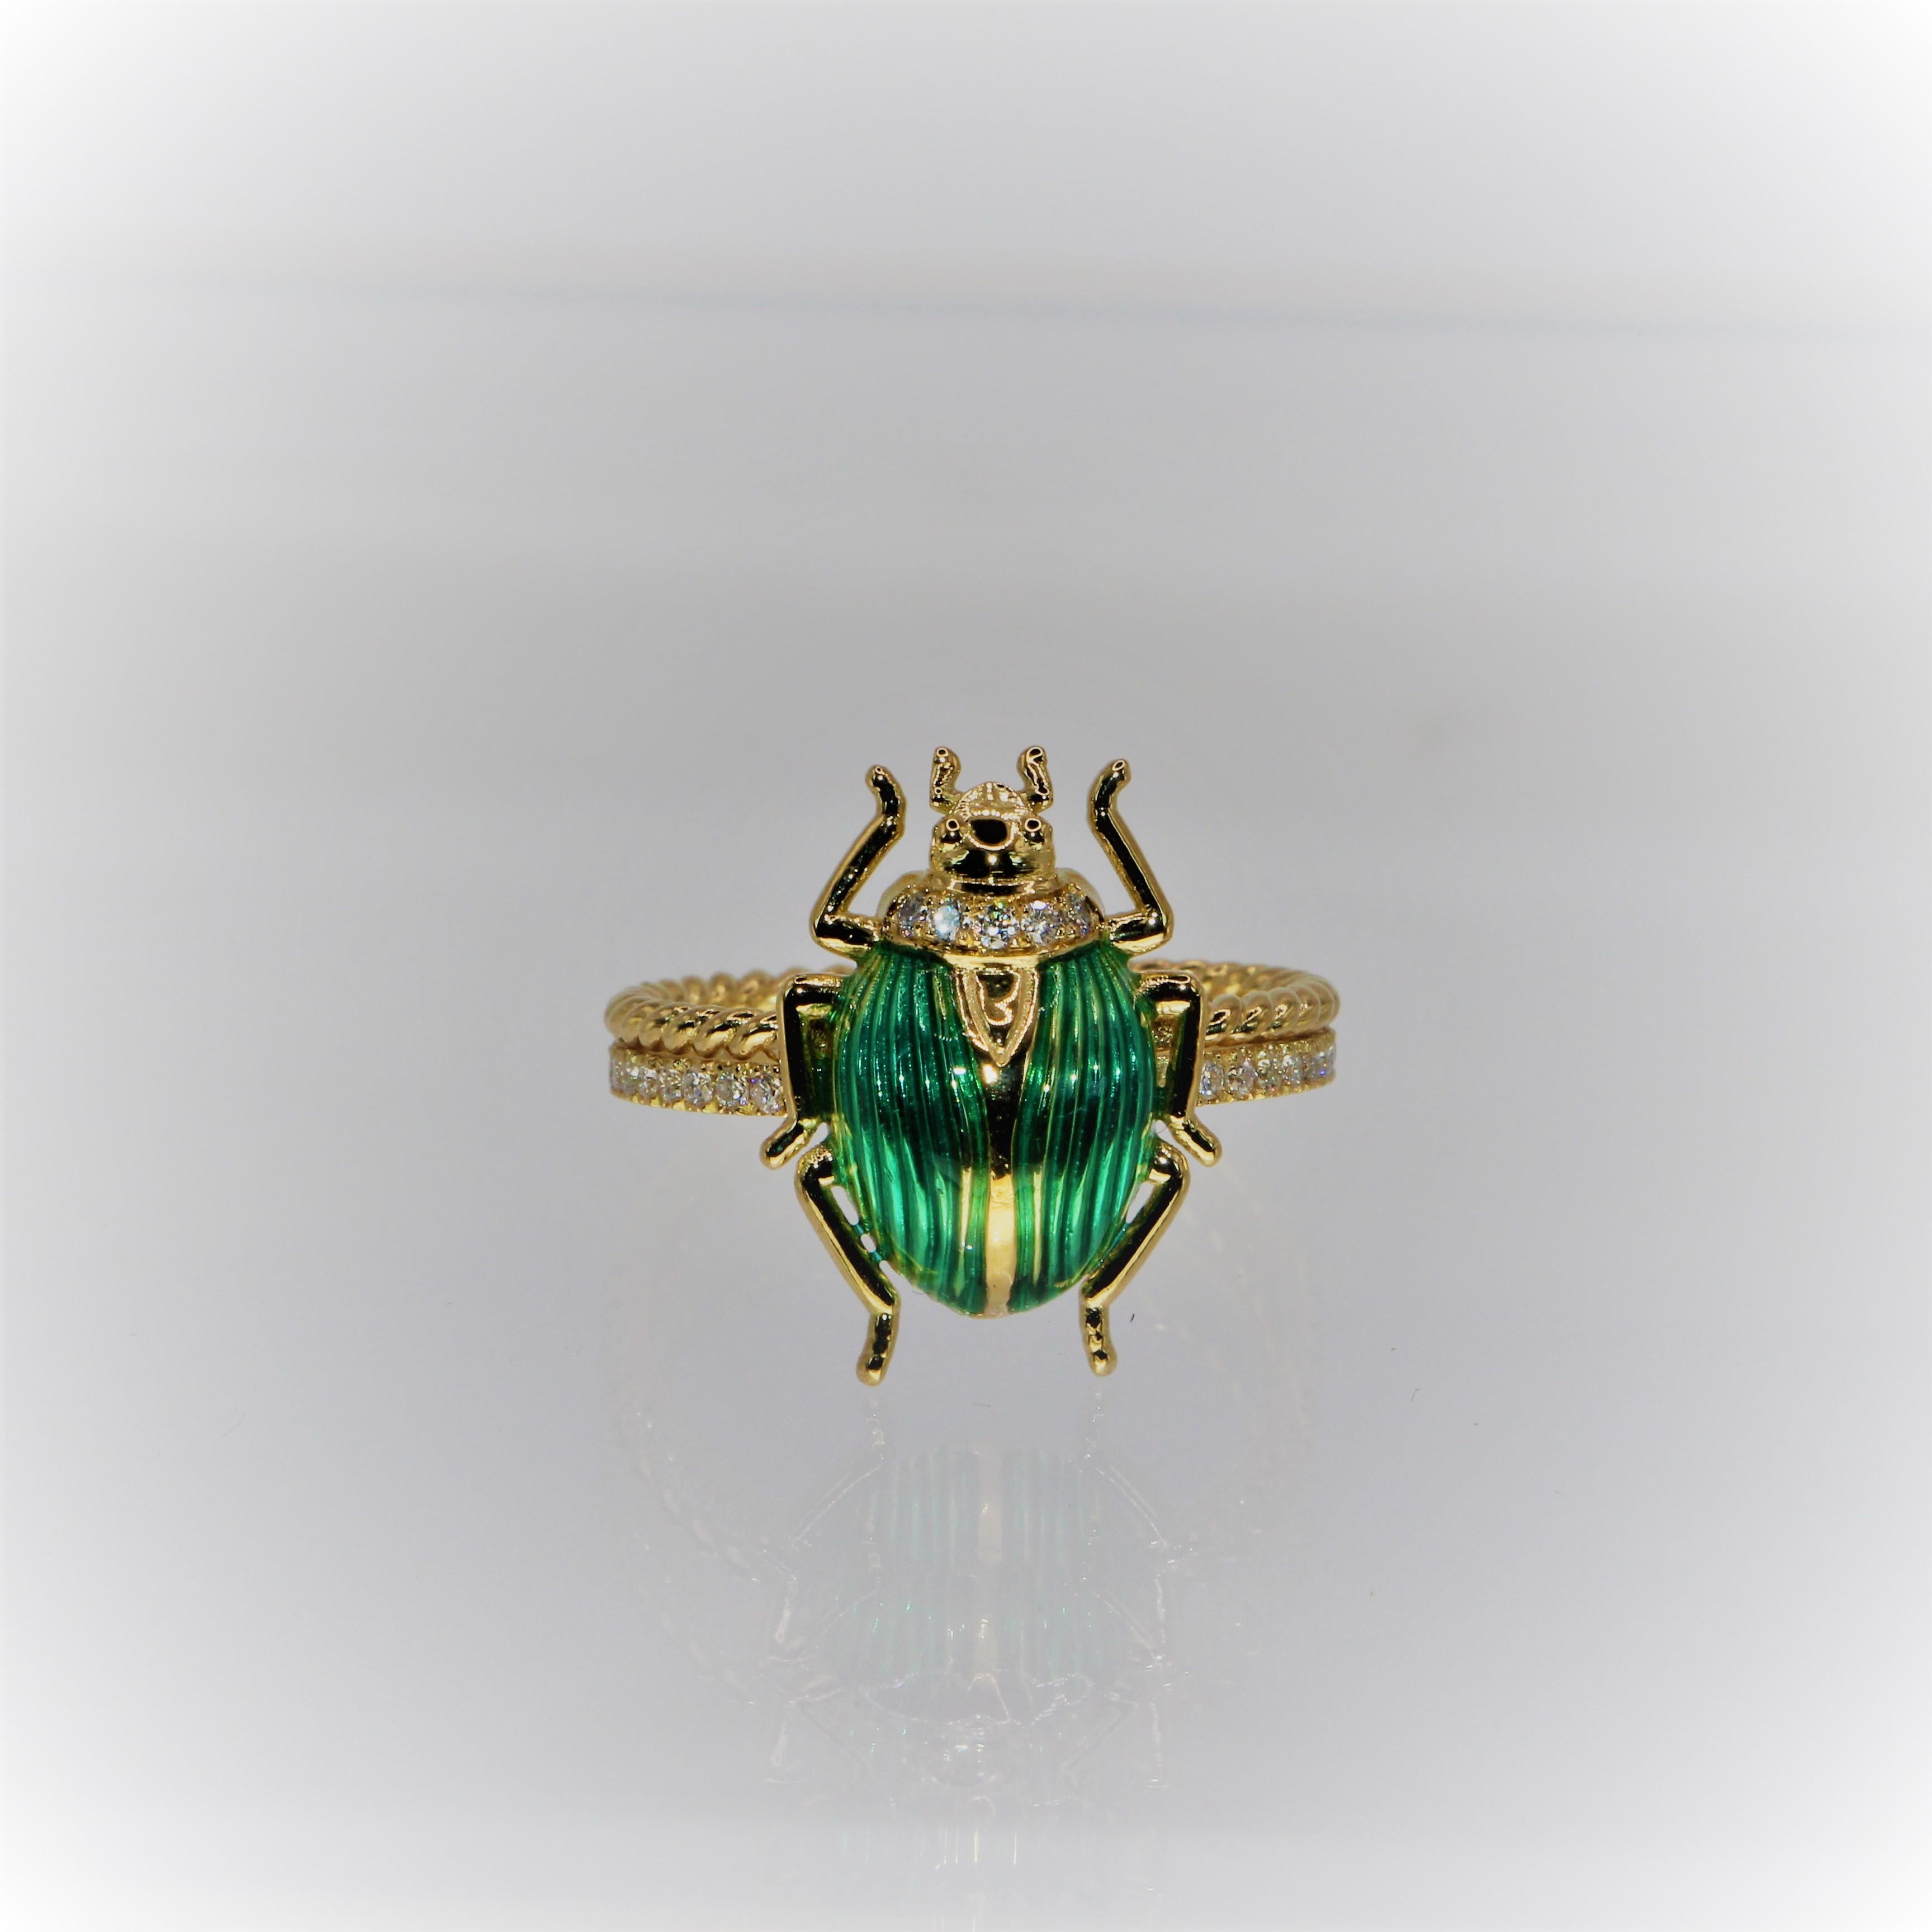 Beetle Ring in 18 carat yellow gold, with granulation technique diamonds  and enamel in green color.
The Diamonds are 0.016ct on the head of the Beetle as also on the base of the ring, A beautiful and detailed work, with enamel in green representing